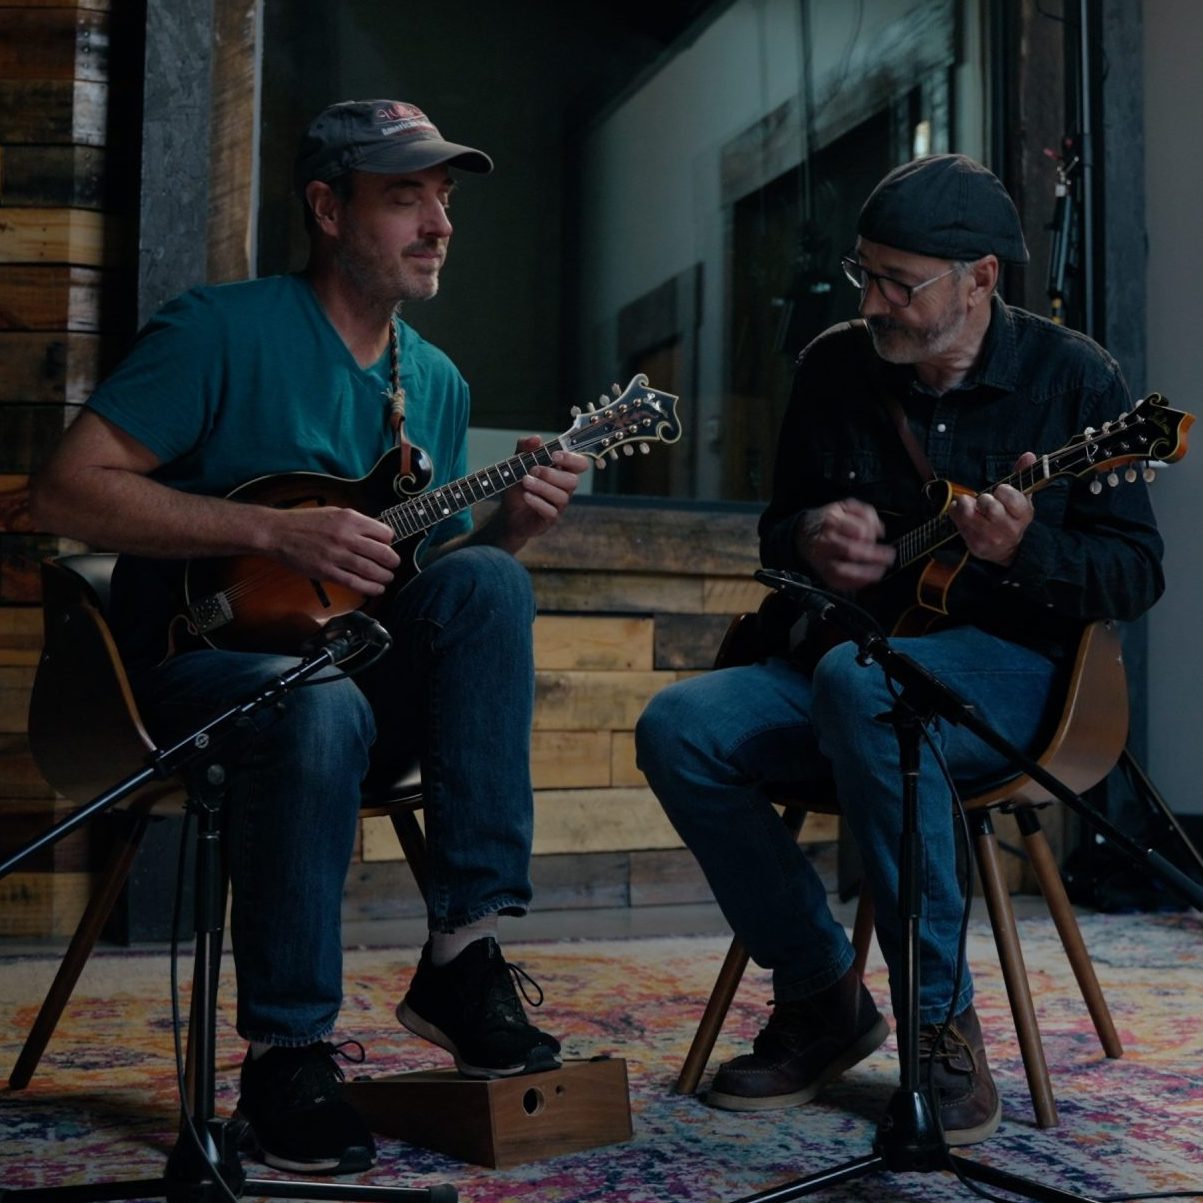 WATCH: Drew Holcomb and the Neighbors, 'American Beauty' [Musicbed Sessions]